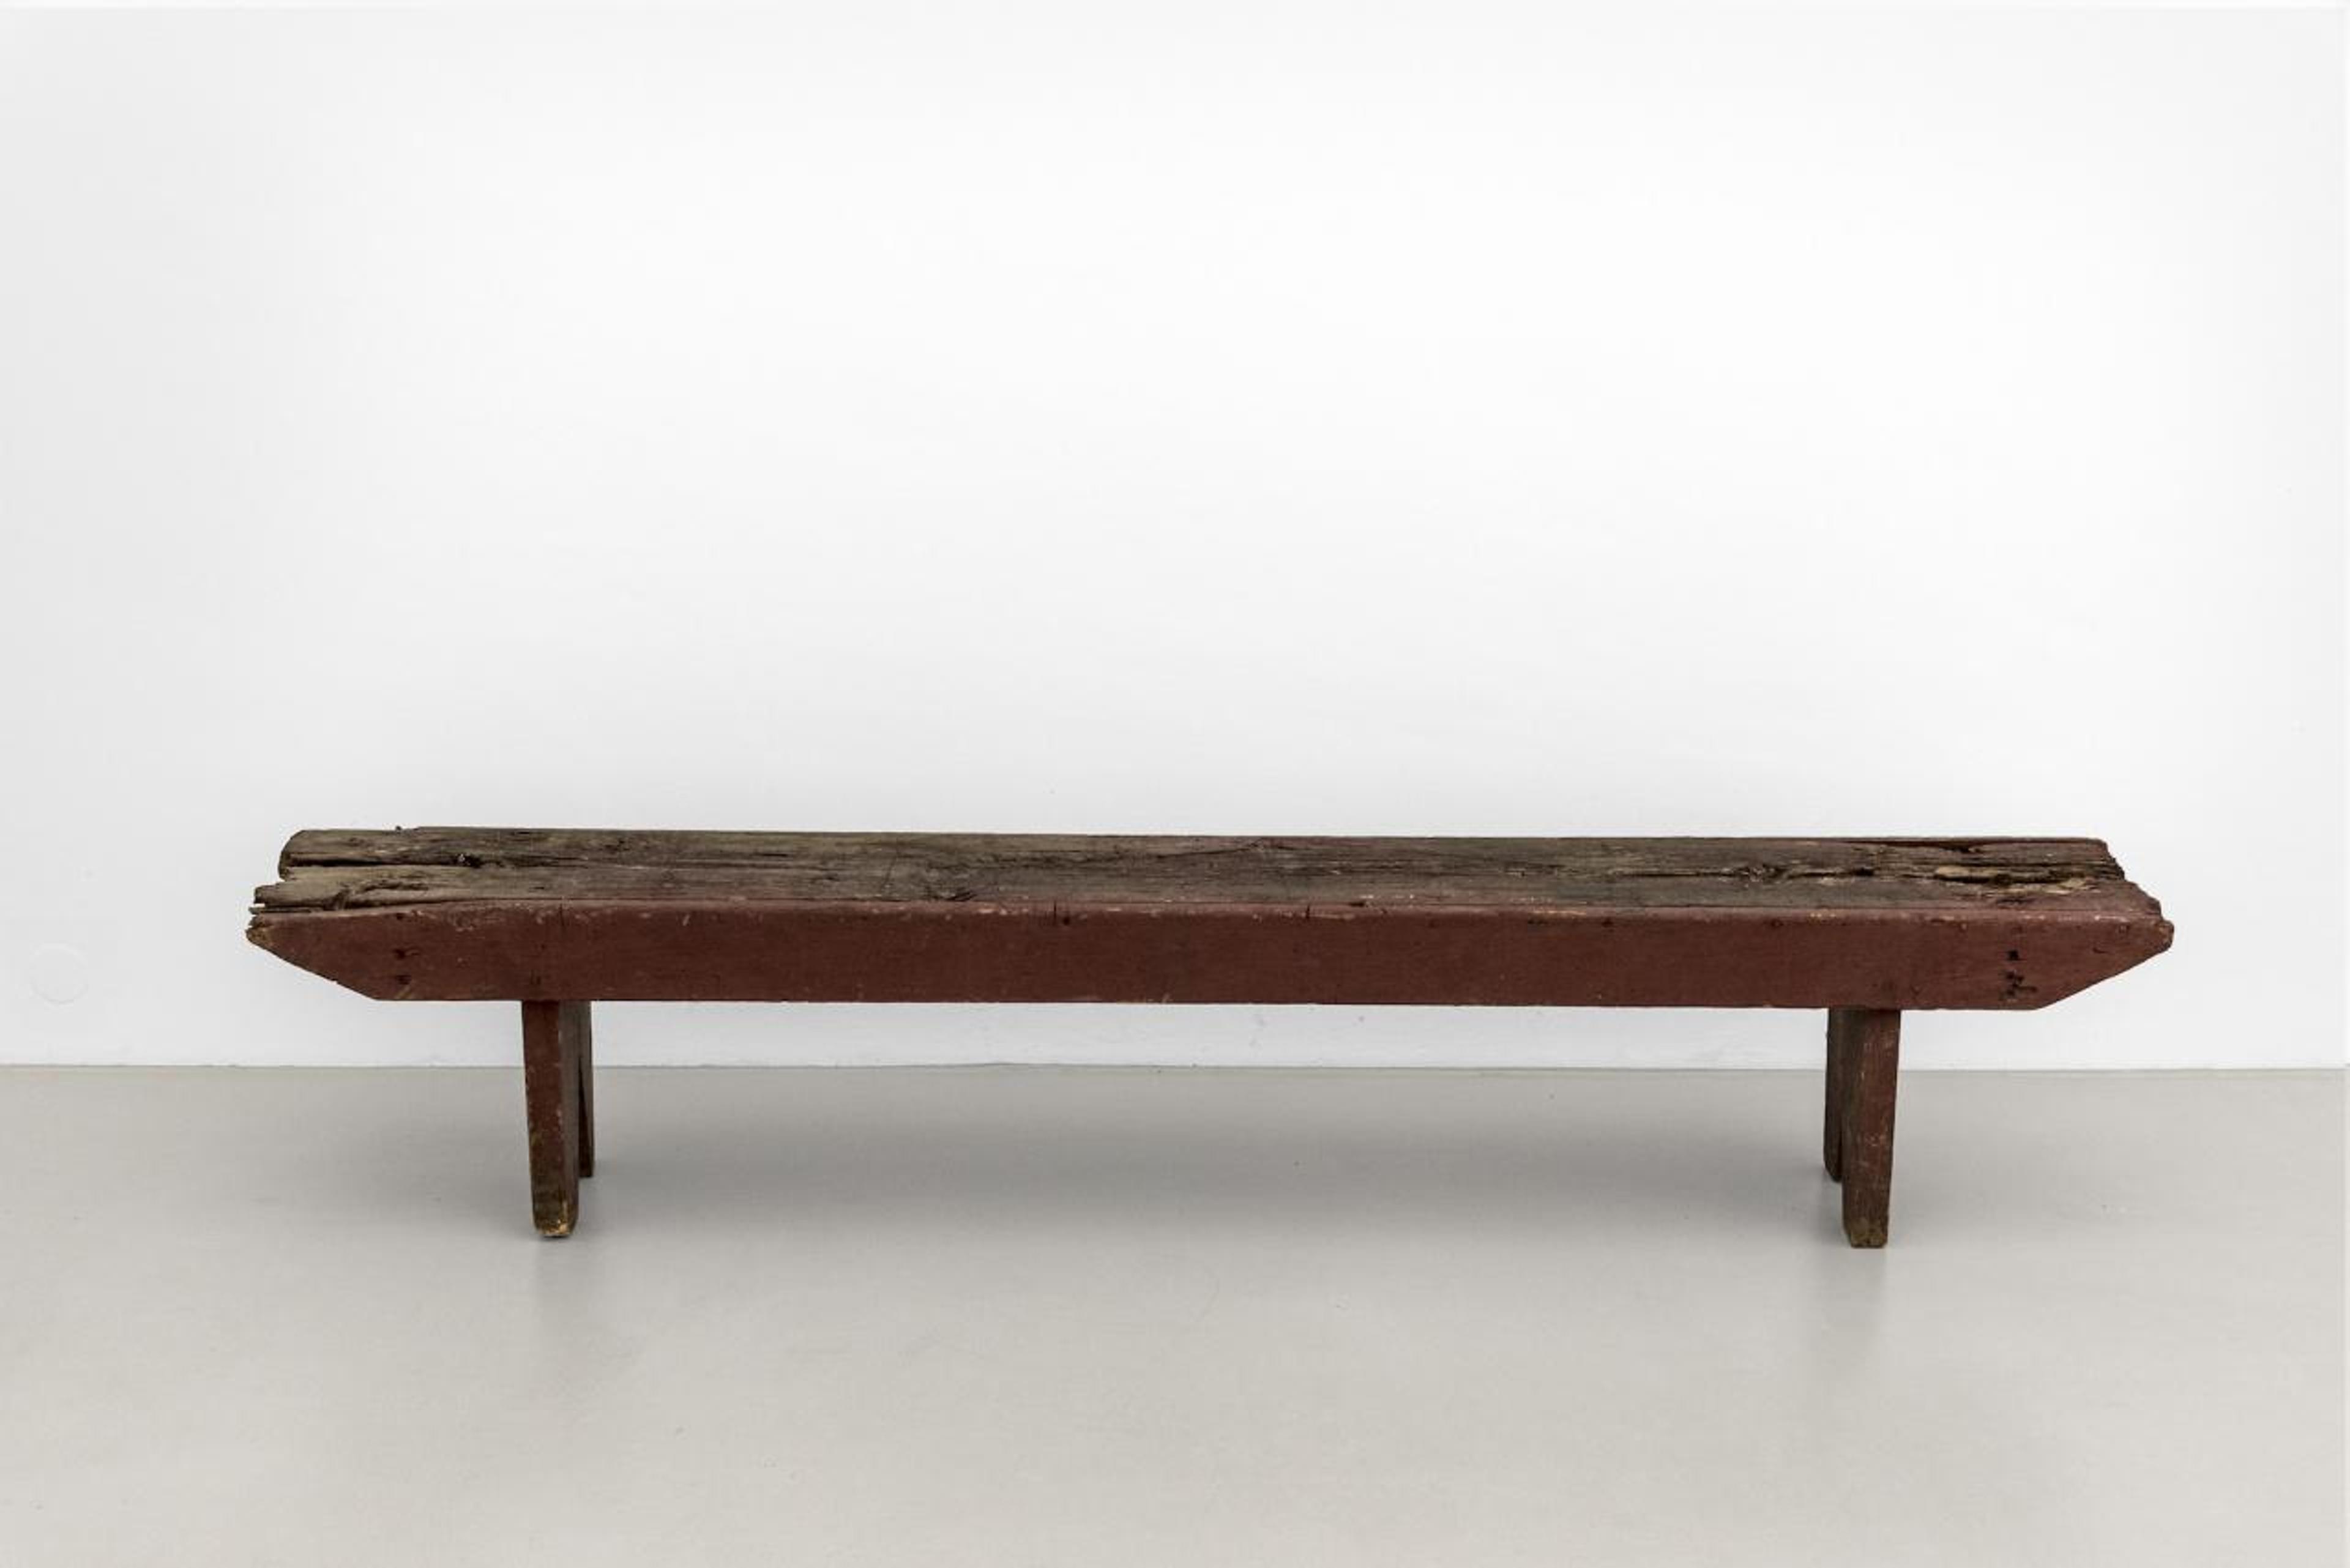 Bench,  Laurie Parsons,&quot;A Body of Work 1987&quot;, Museum Abteiberg, 2018-19, exhibition _______INSERT_______